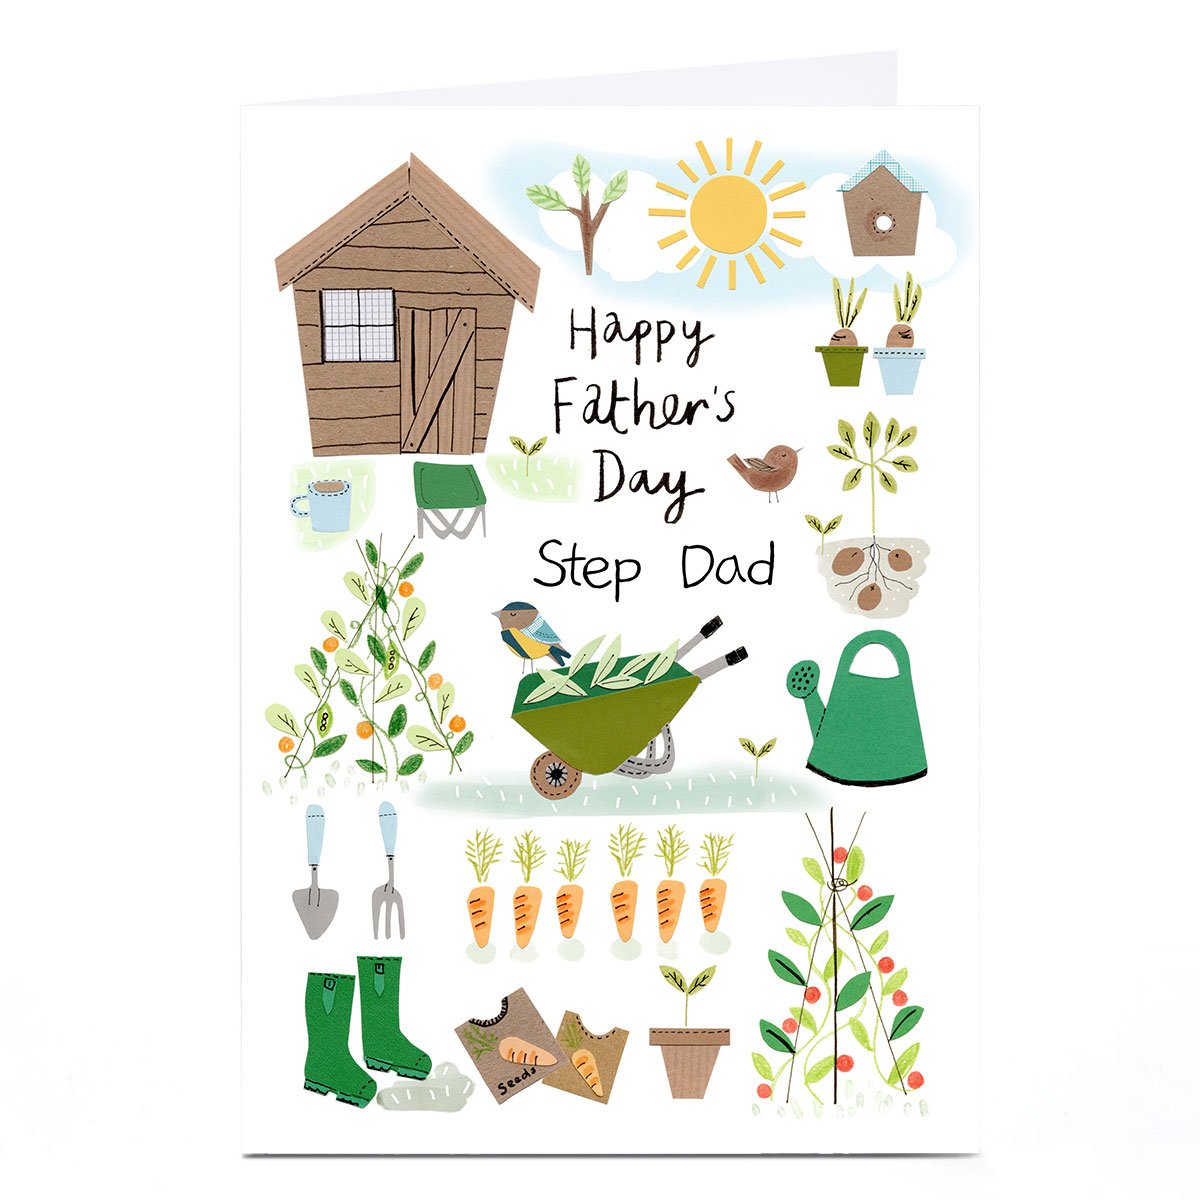 Personalised Lindsay Loves To Draw Father's Day Card - Gardening